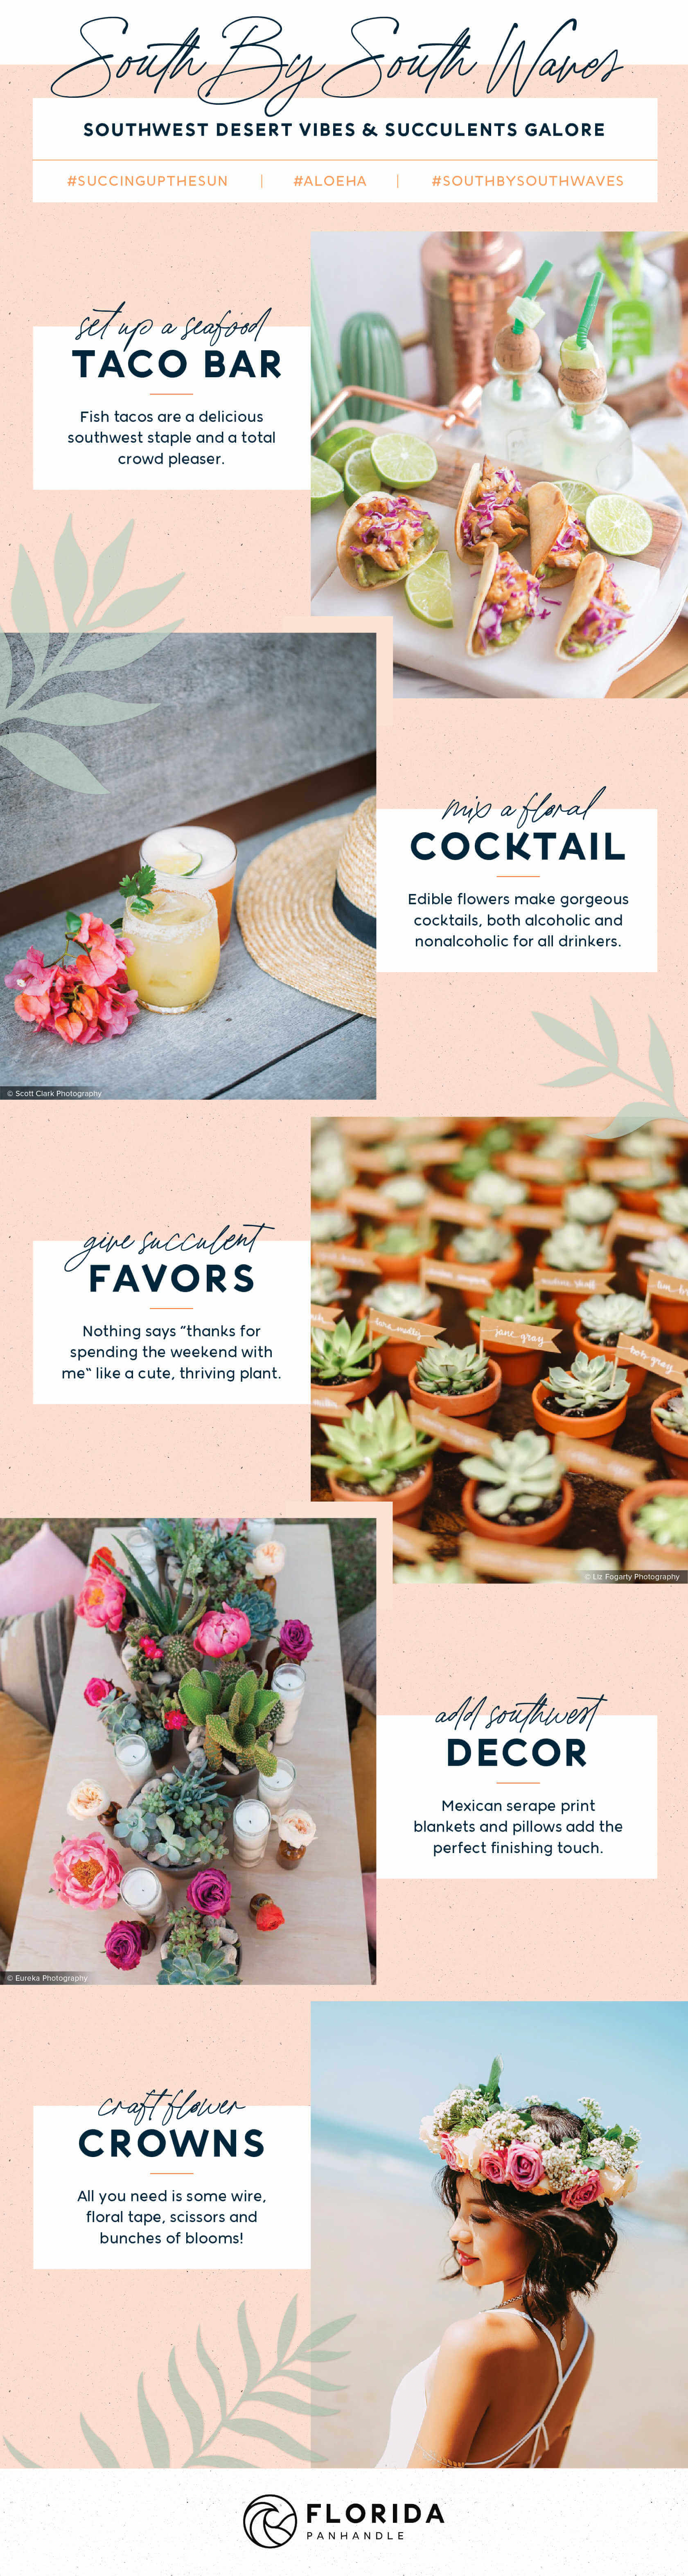 southwest desert vibes and succulents galore guide